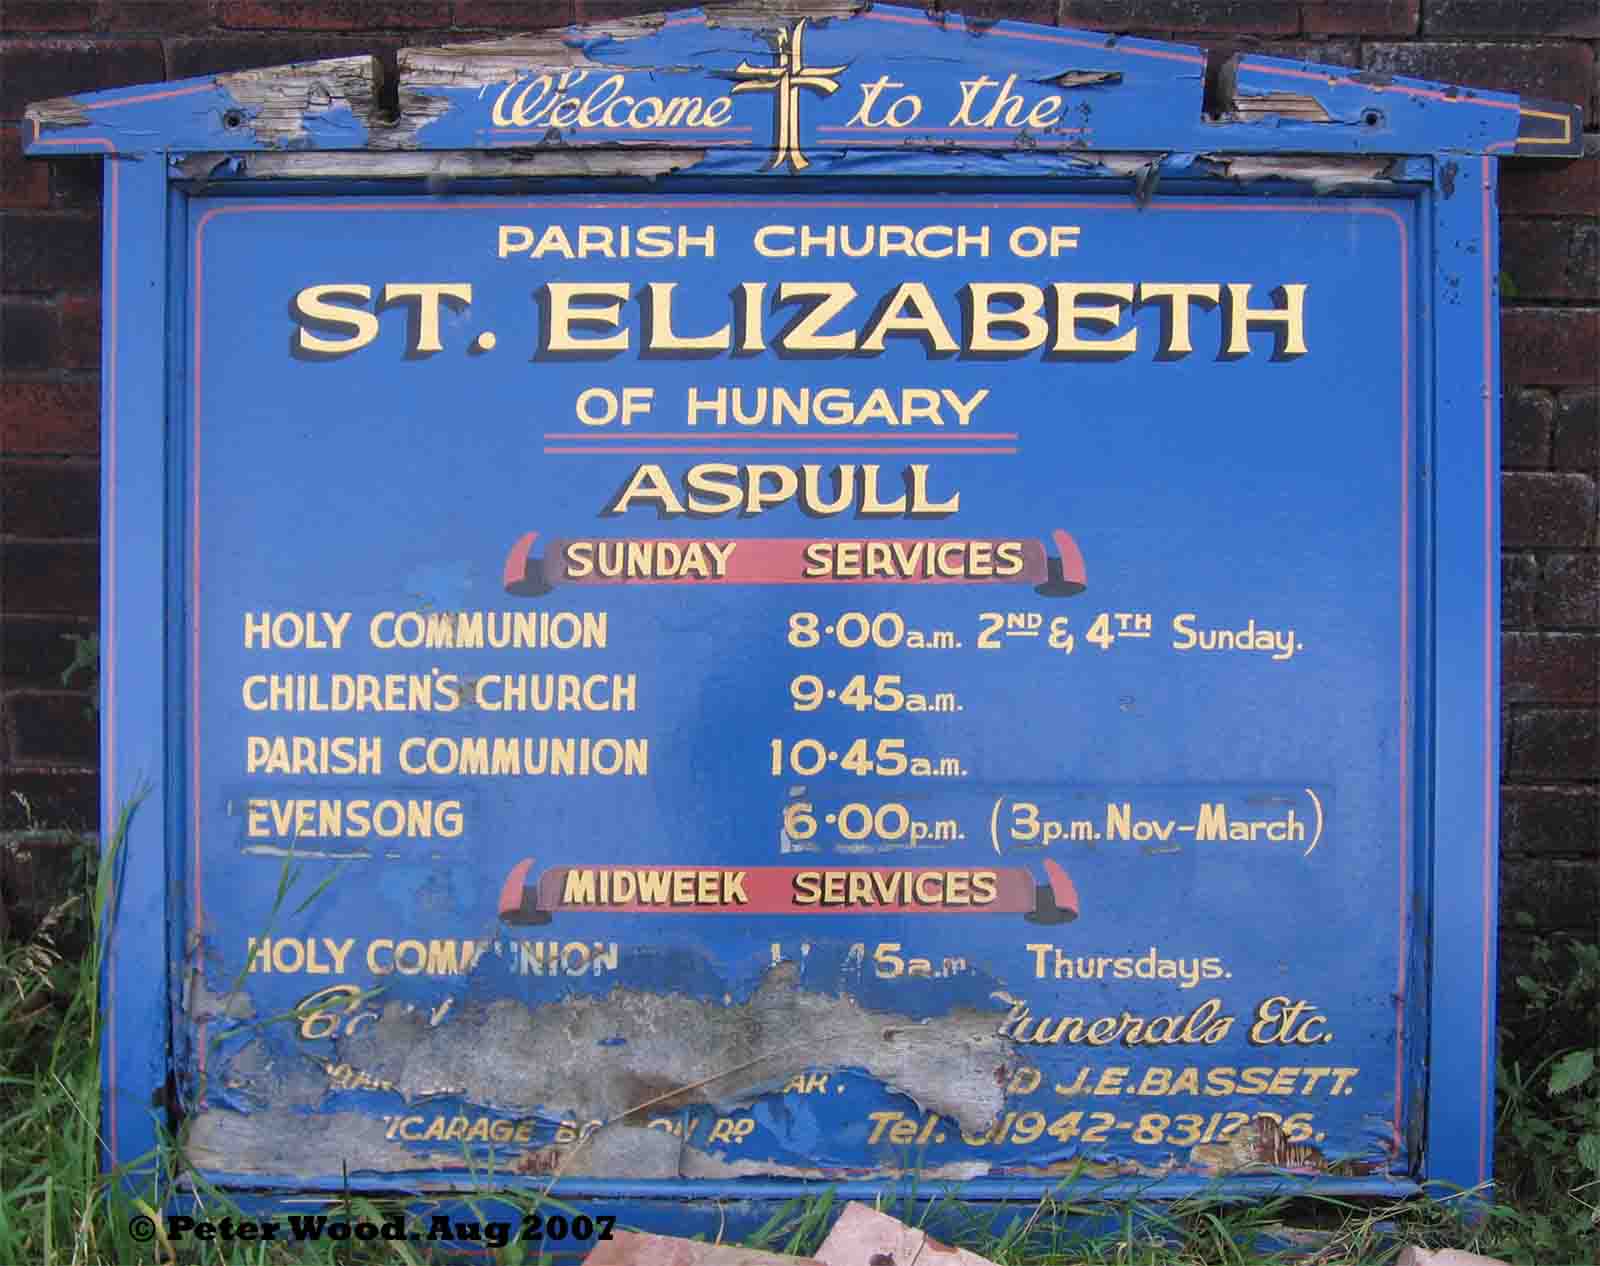 The previous Church Sign, showing the full name St Elizabeth of Hungary, Aspull